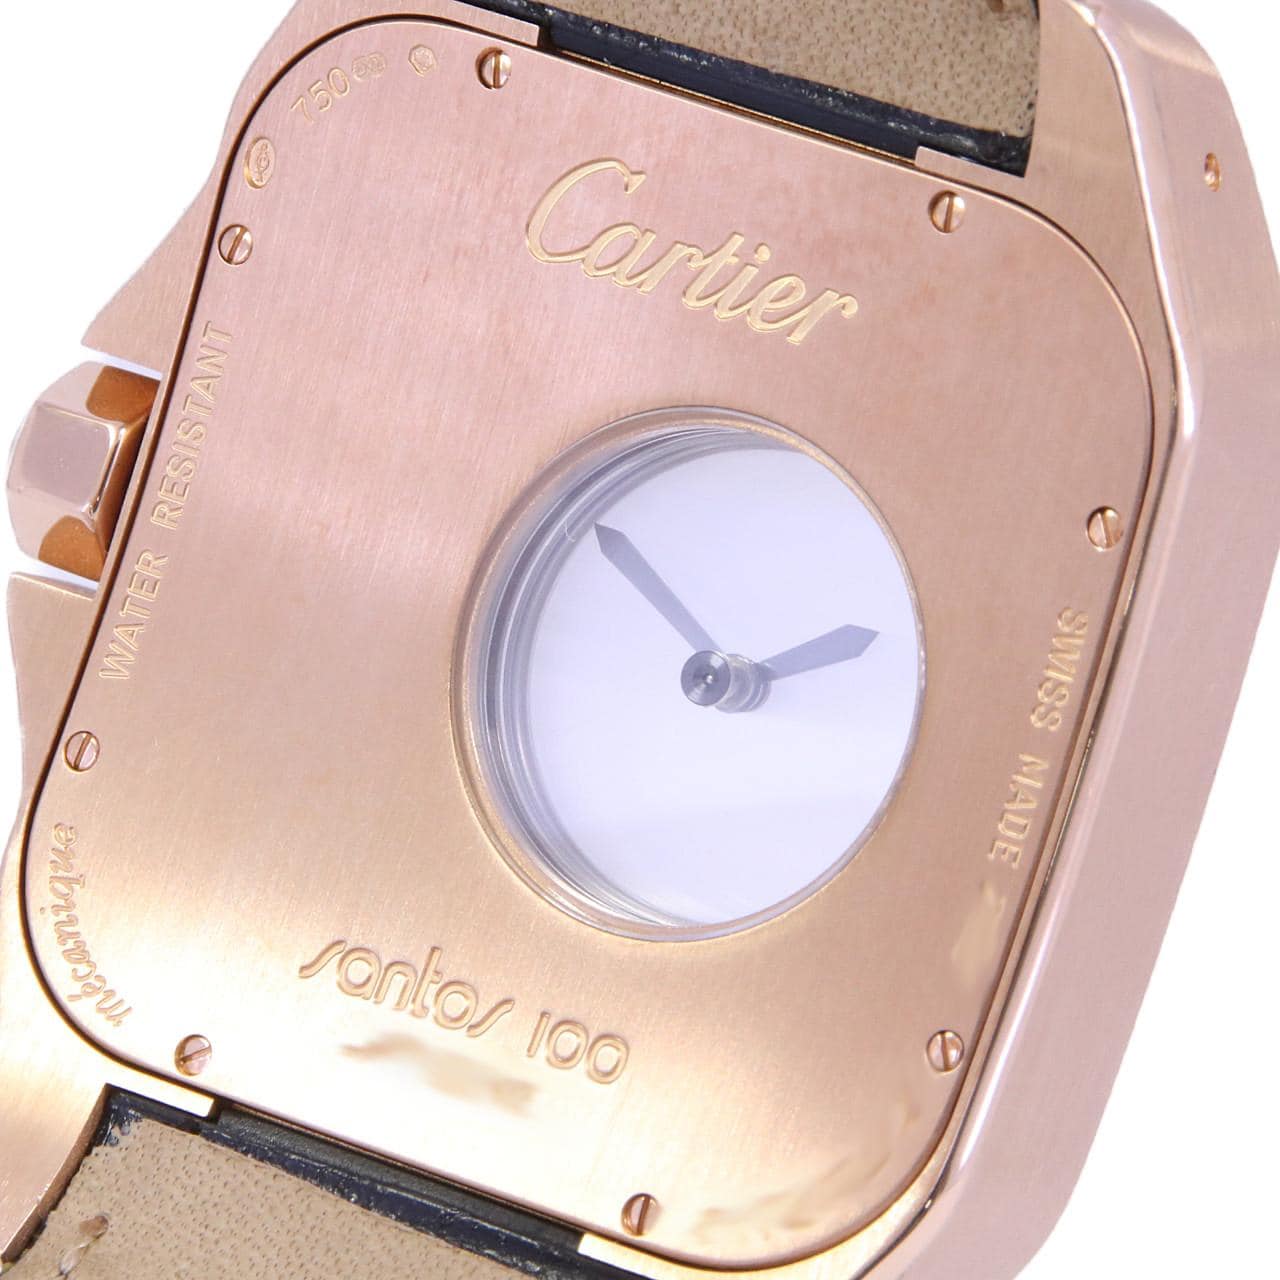 Cartier Santos 100LX Mysterious PG LIMITED W20115Y1 Manual Winding